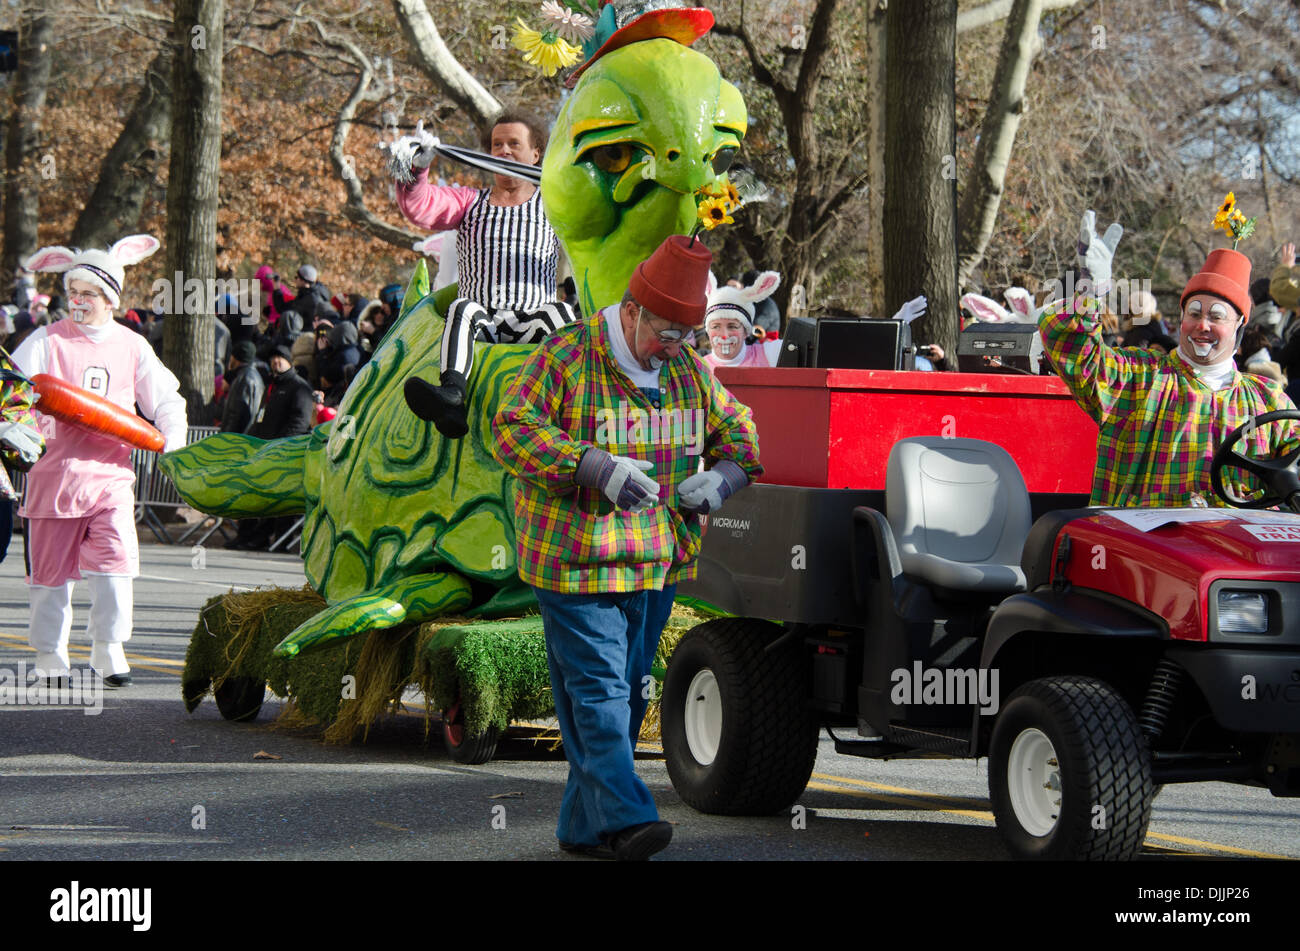 New York, USA.  28th November 2013. Richard Simmons rides a turtle in the 87th Annual Macy’s Thanksgiving Day Parade Credit: © Jennifer Booher/Alamy Live News  Stock Photo